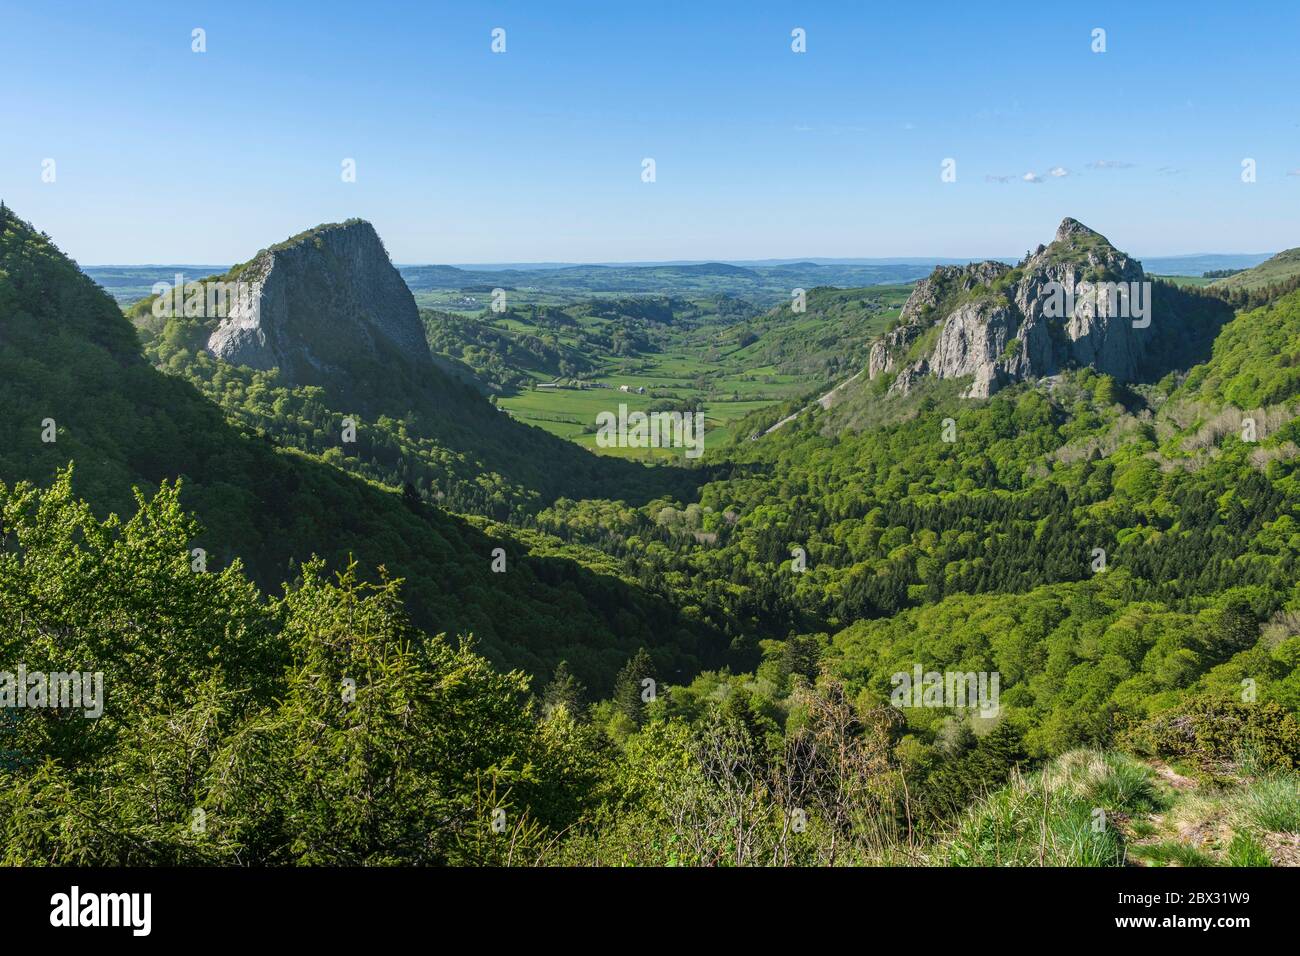 France, Puy de Dome, regional natural park of Auvergne volcanoes, Monts Dore, col de Guéry, roches Tuiliere (left) and Sanadoire (right), two volcanic protrusions Stock Photo